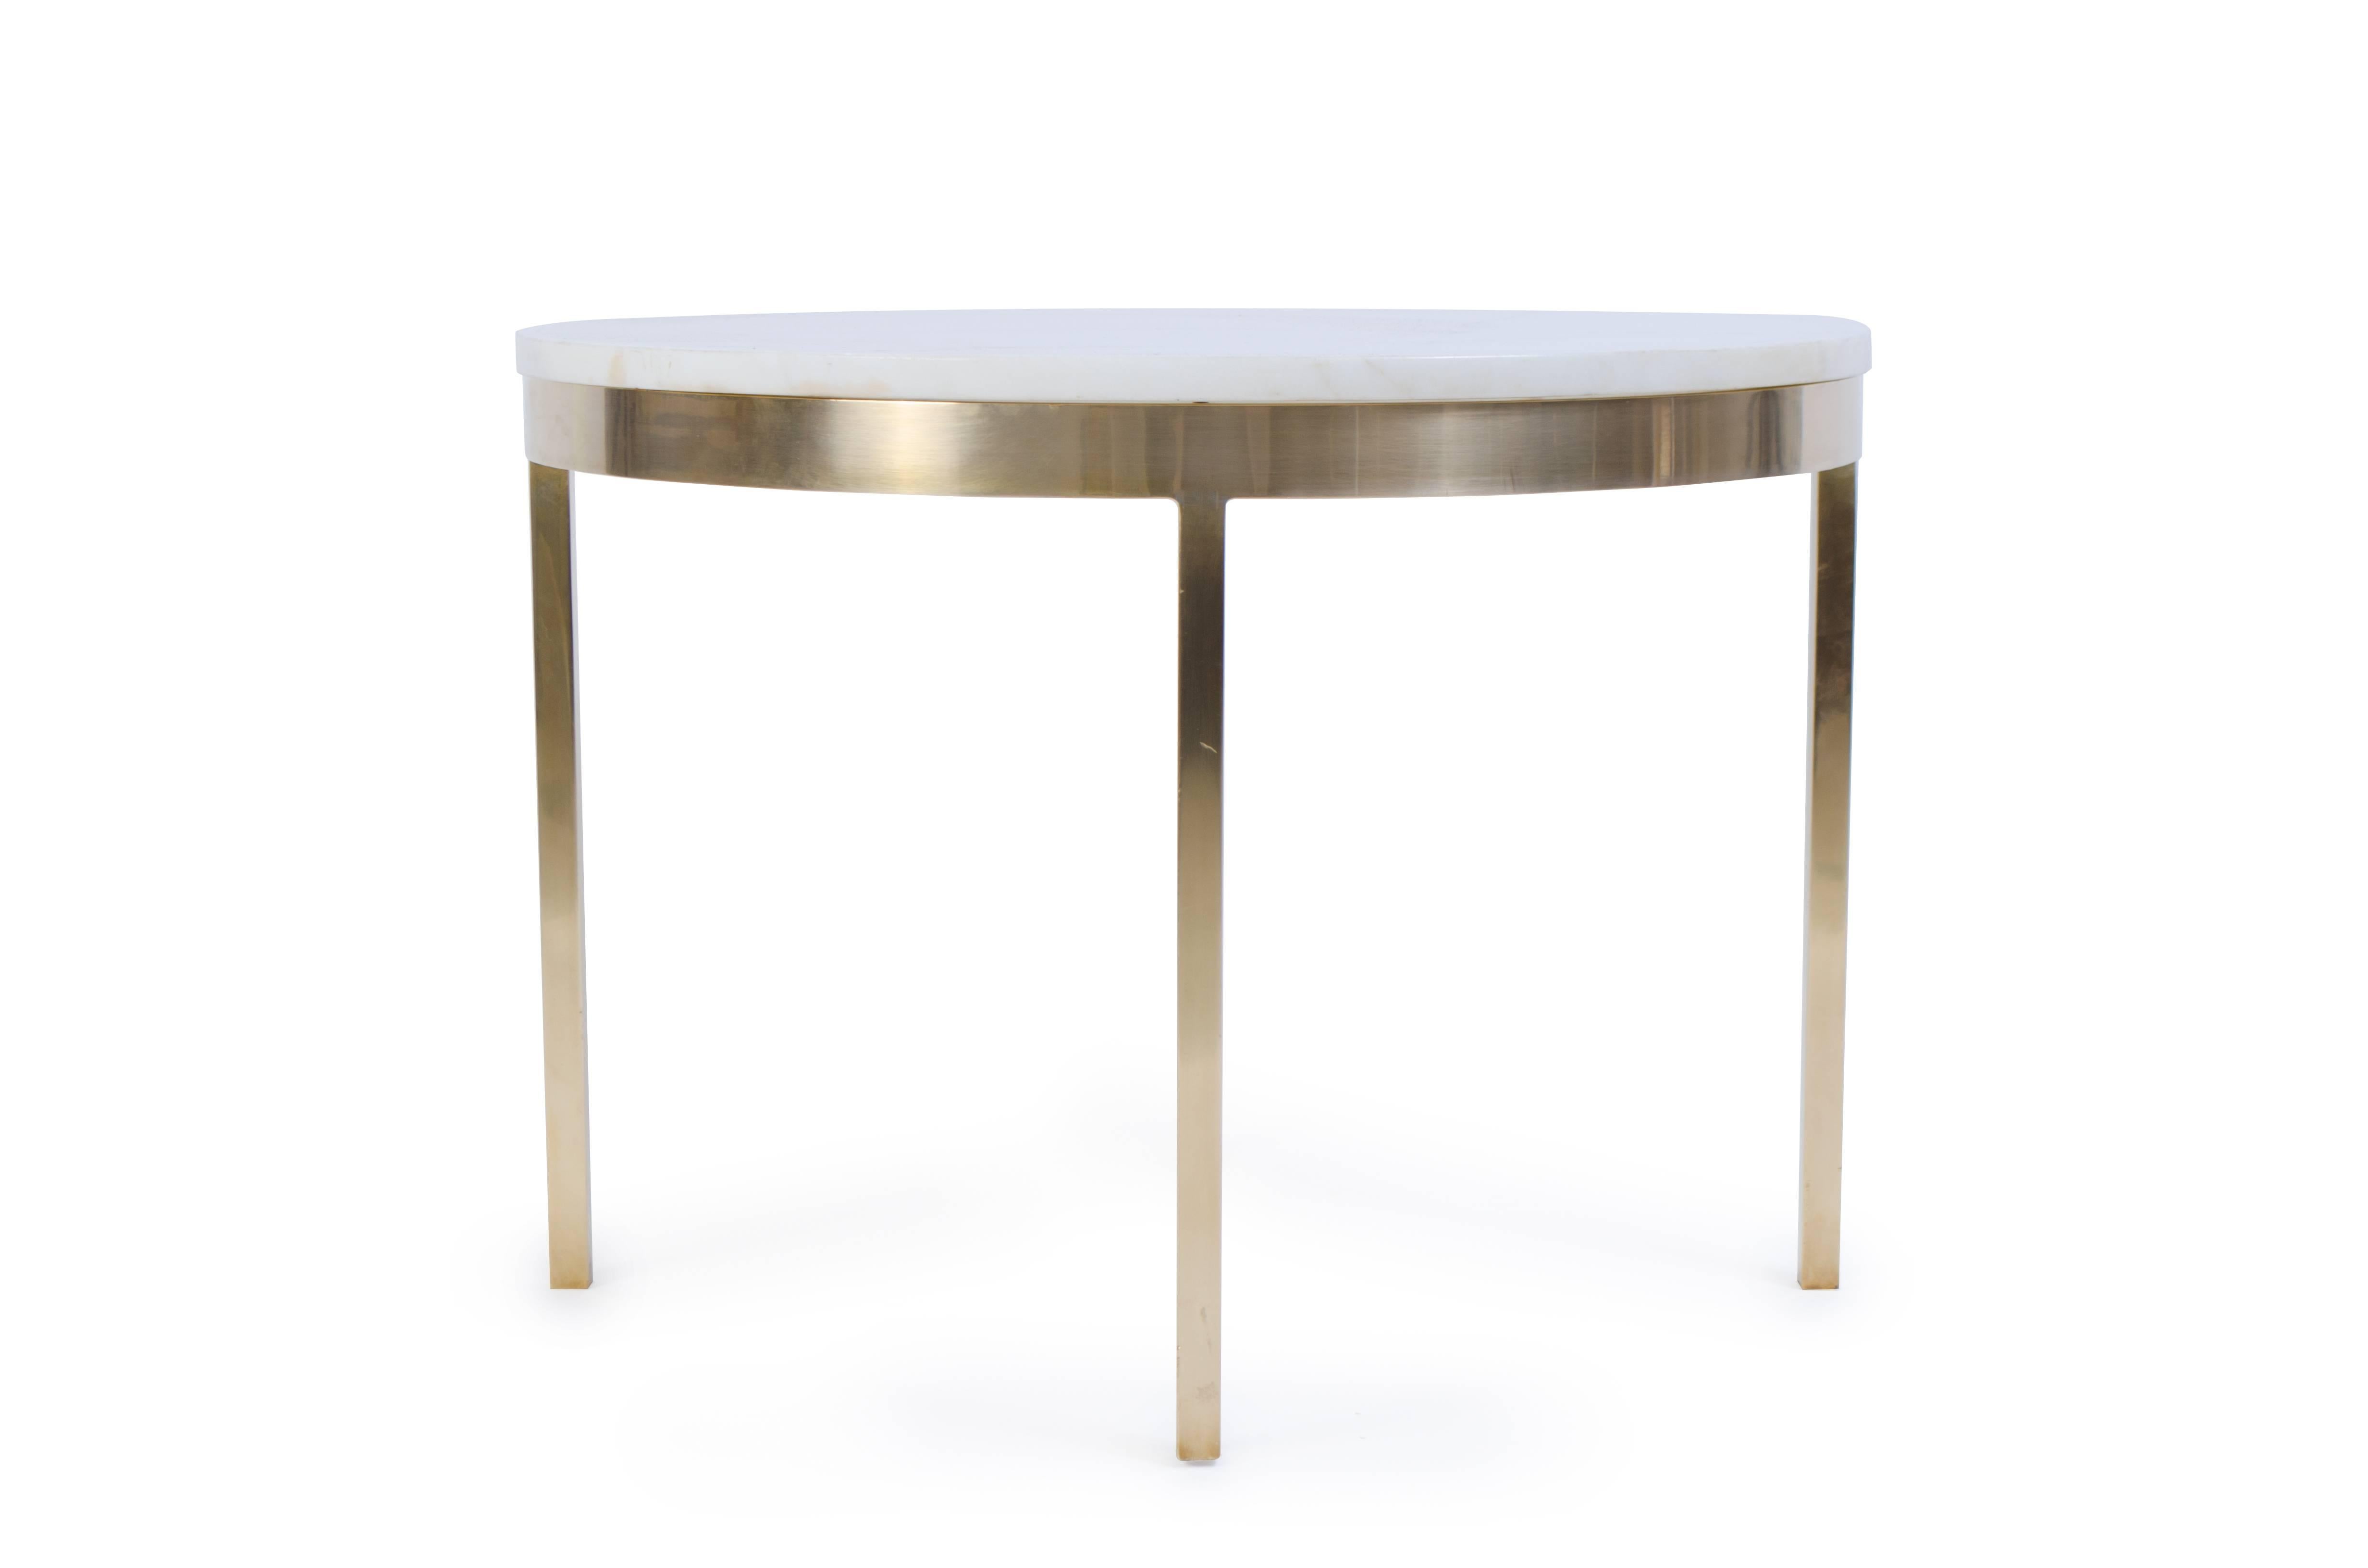 Marble, brass and oh so stunning! This petite round accent table makes for the perfect addition to any room, between two chairs or next to a lounge chair. Crafted from Carrara marble and solid brass, wonderful materiality.